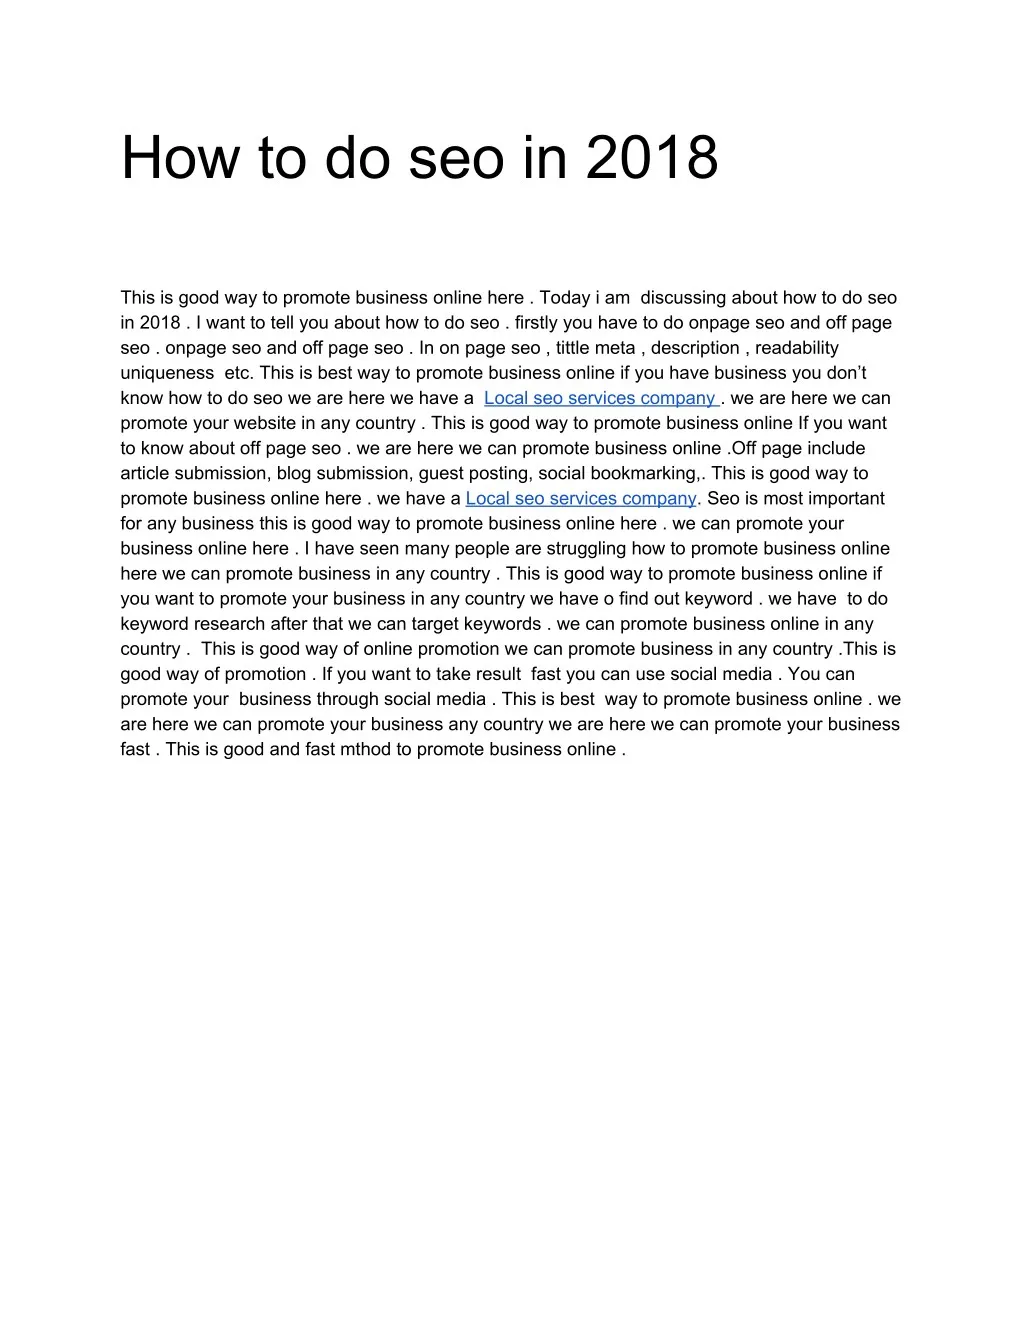 how to do seo in 2018